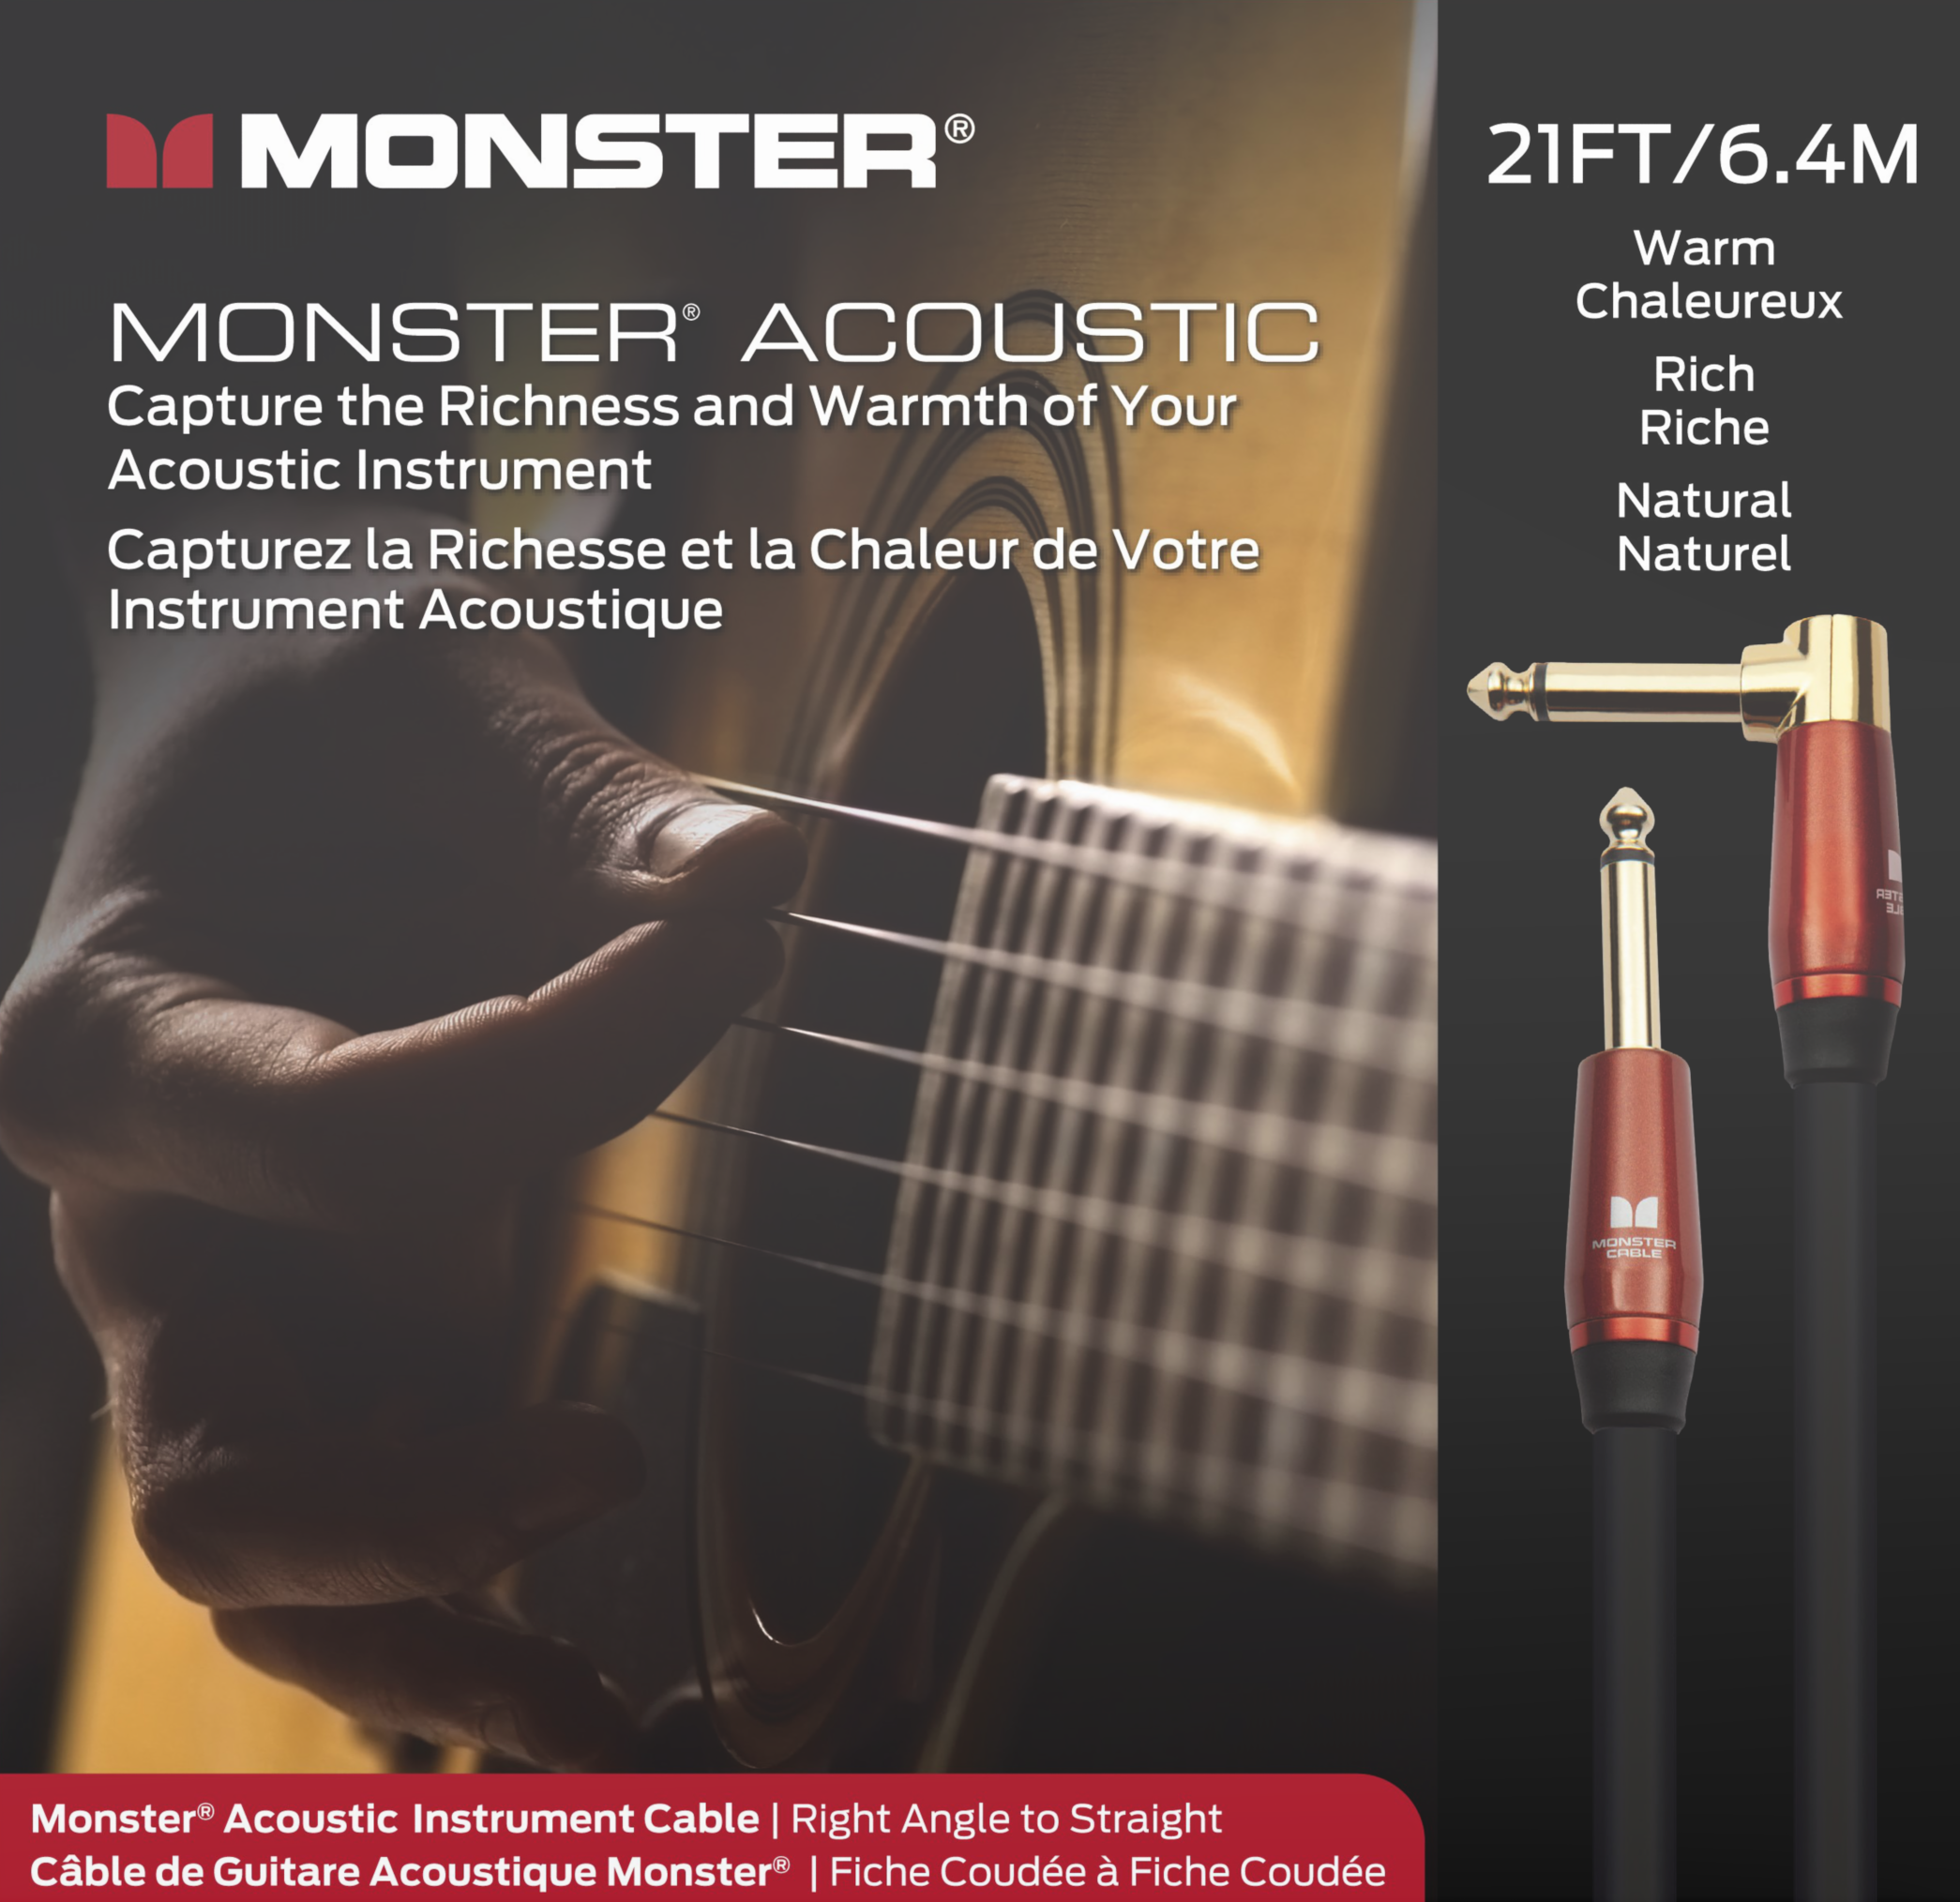 Monster® Prolink Acoustic Instrument Cable - HIENDGUITAR 21ft(6.4m) / Straight-Angle 21ft(6.4m) Monstercable Cable